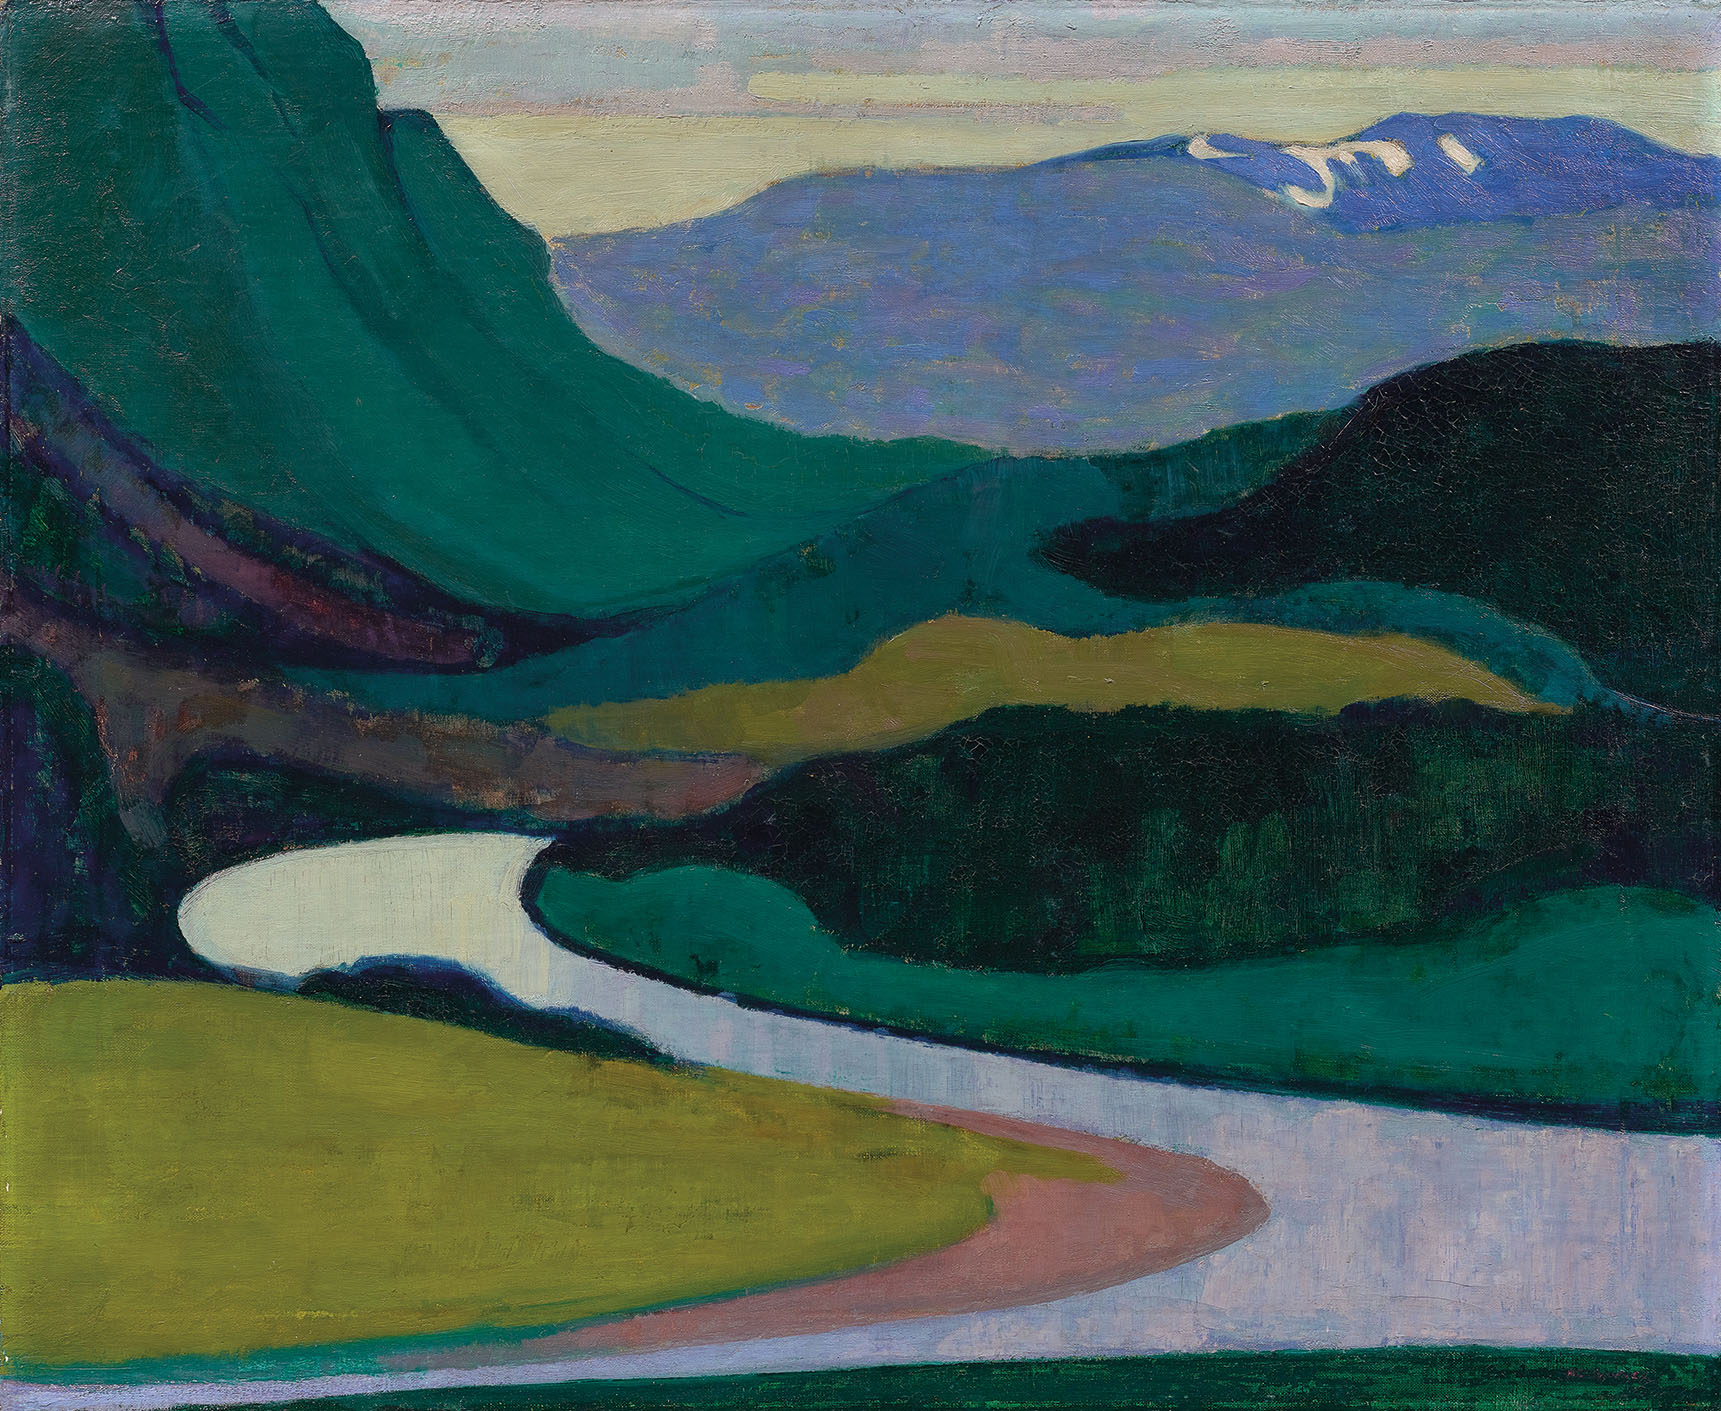 A landscape painted in bold colours. In the foreground a river winds through a pink and chartreuse green landscape with green and blue mountains in the distance.